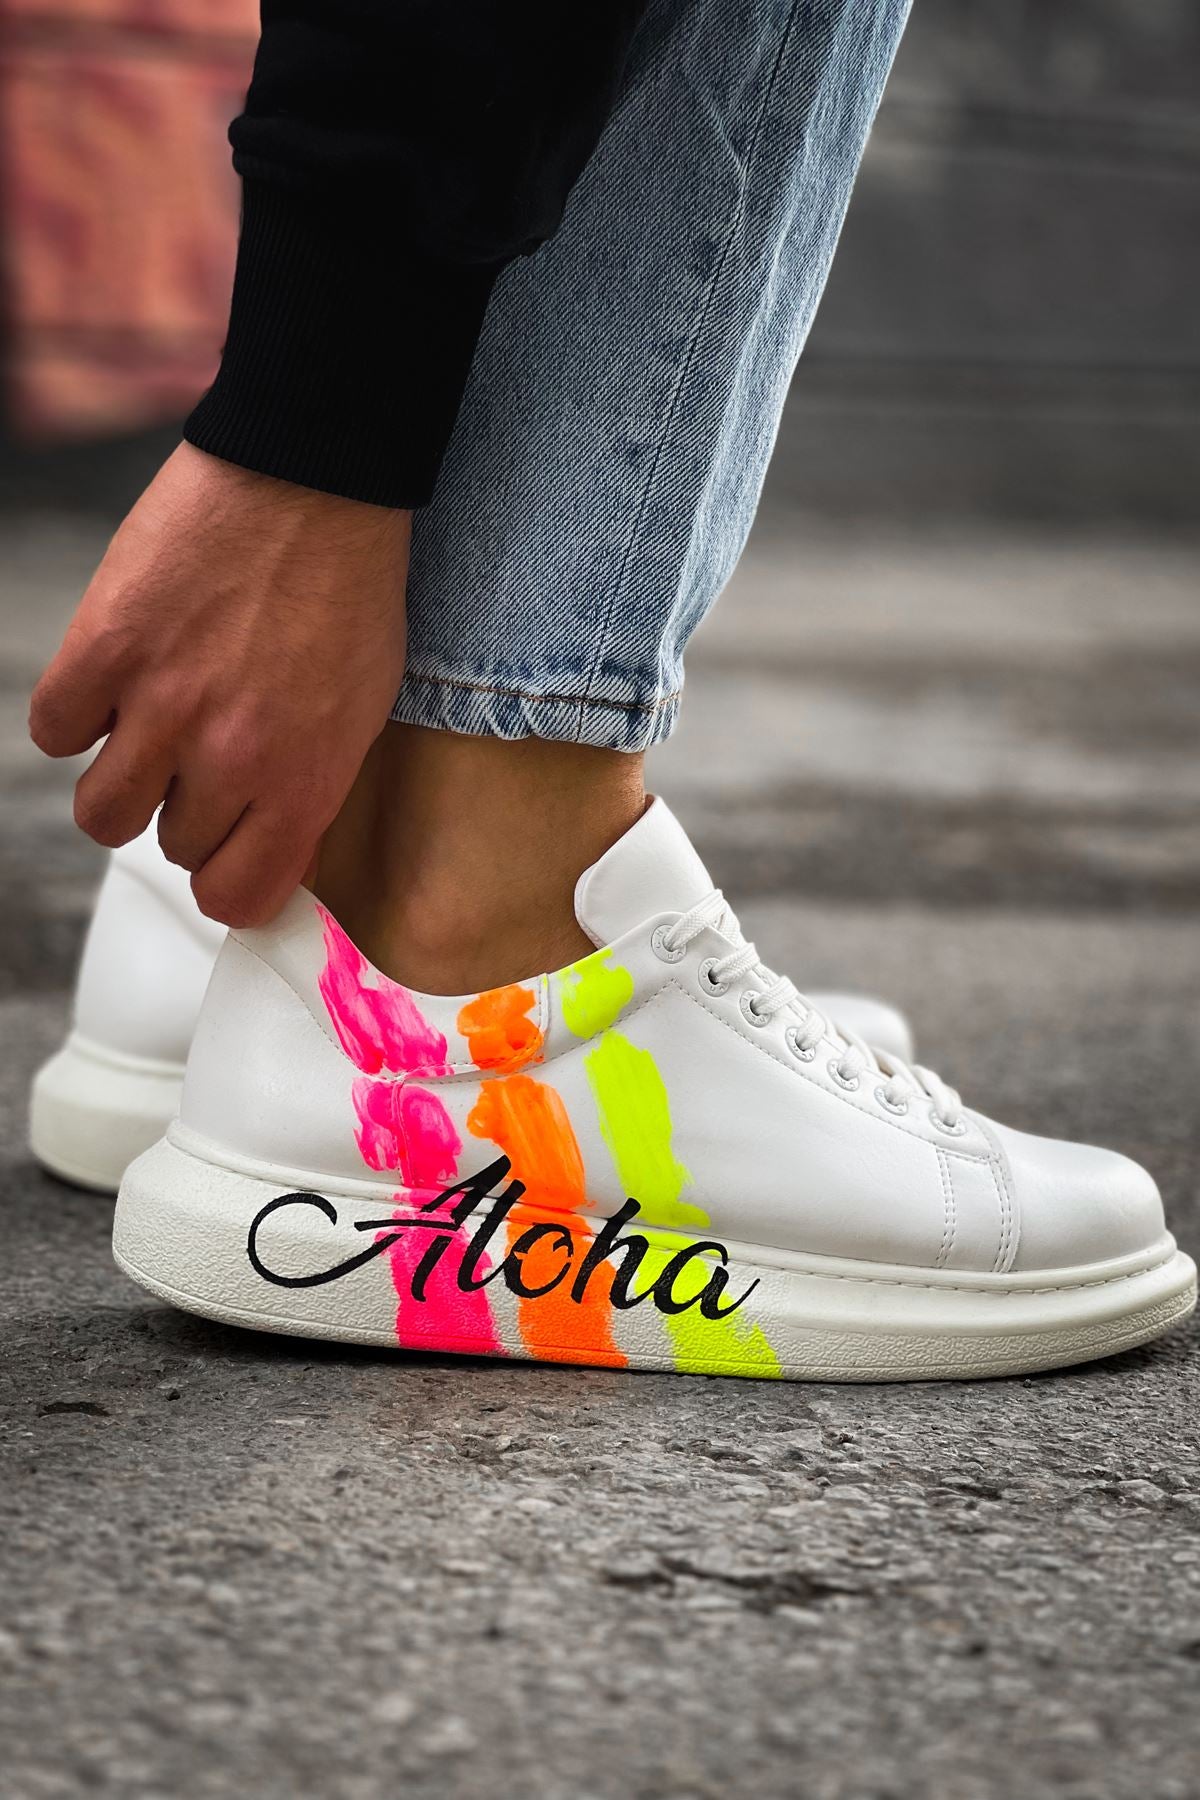 CH254 CBT Pittura Men's Shoes 501 ALOHA YELLOW PINK WHITE - STREETMODE ™